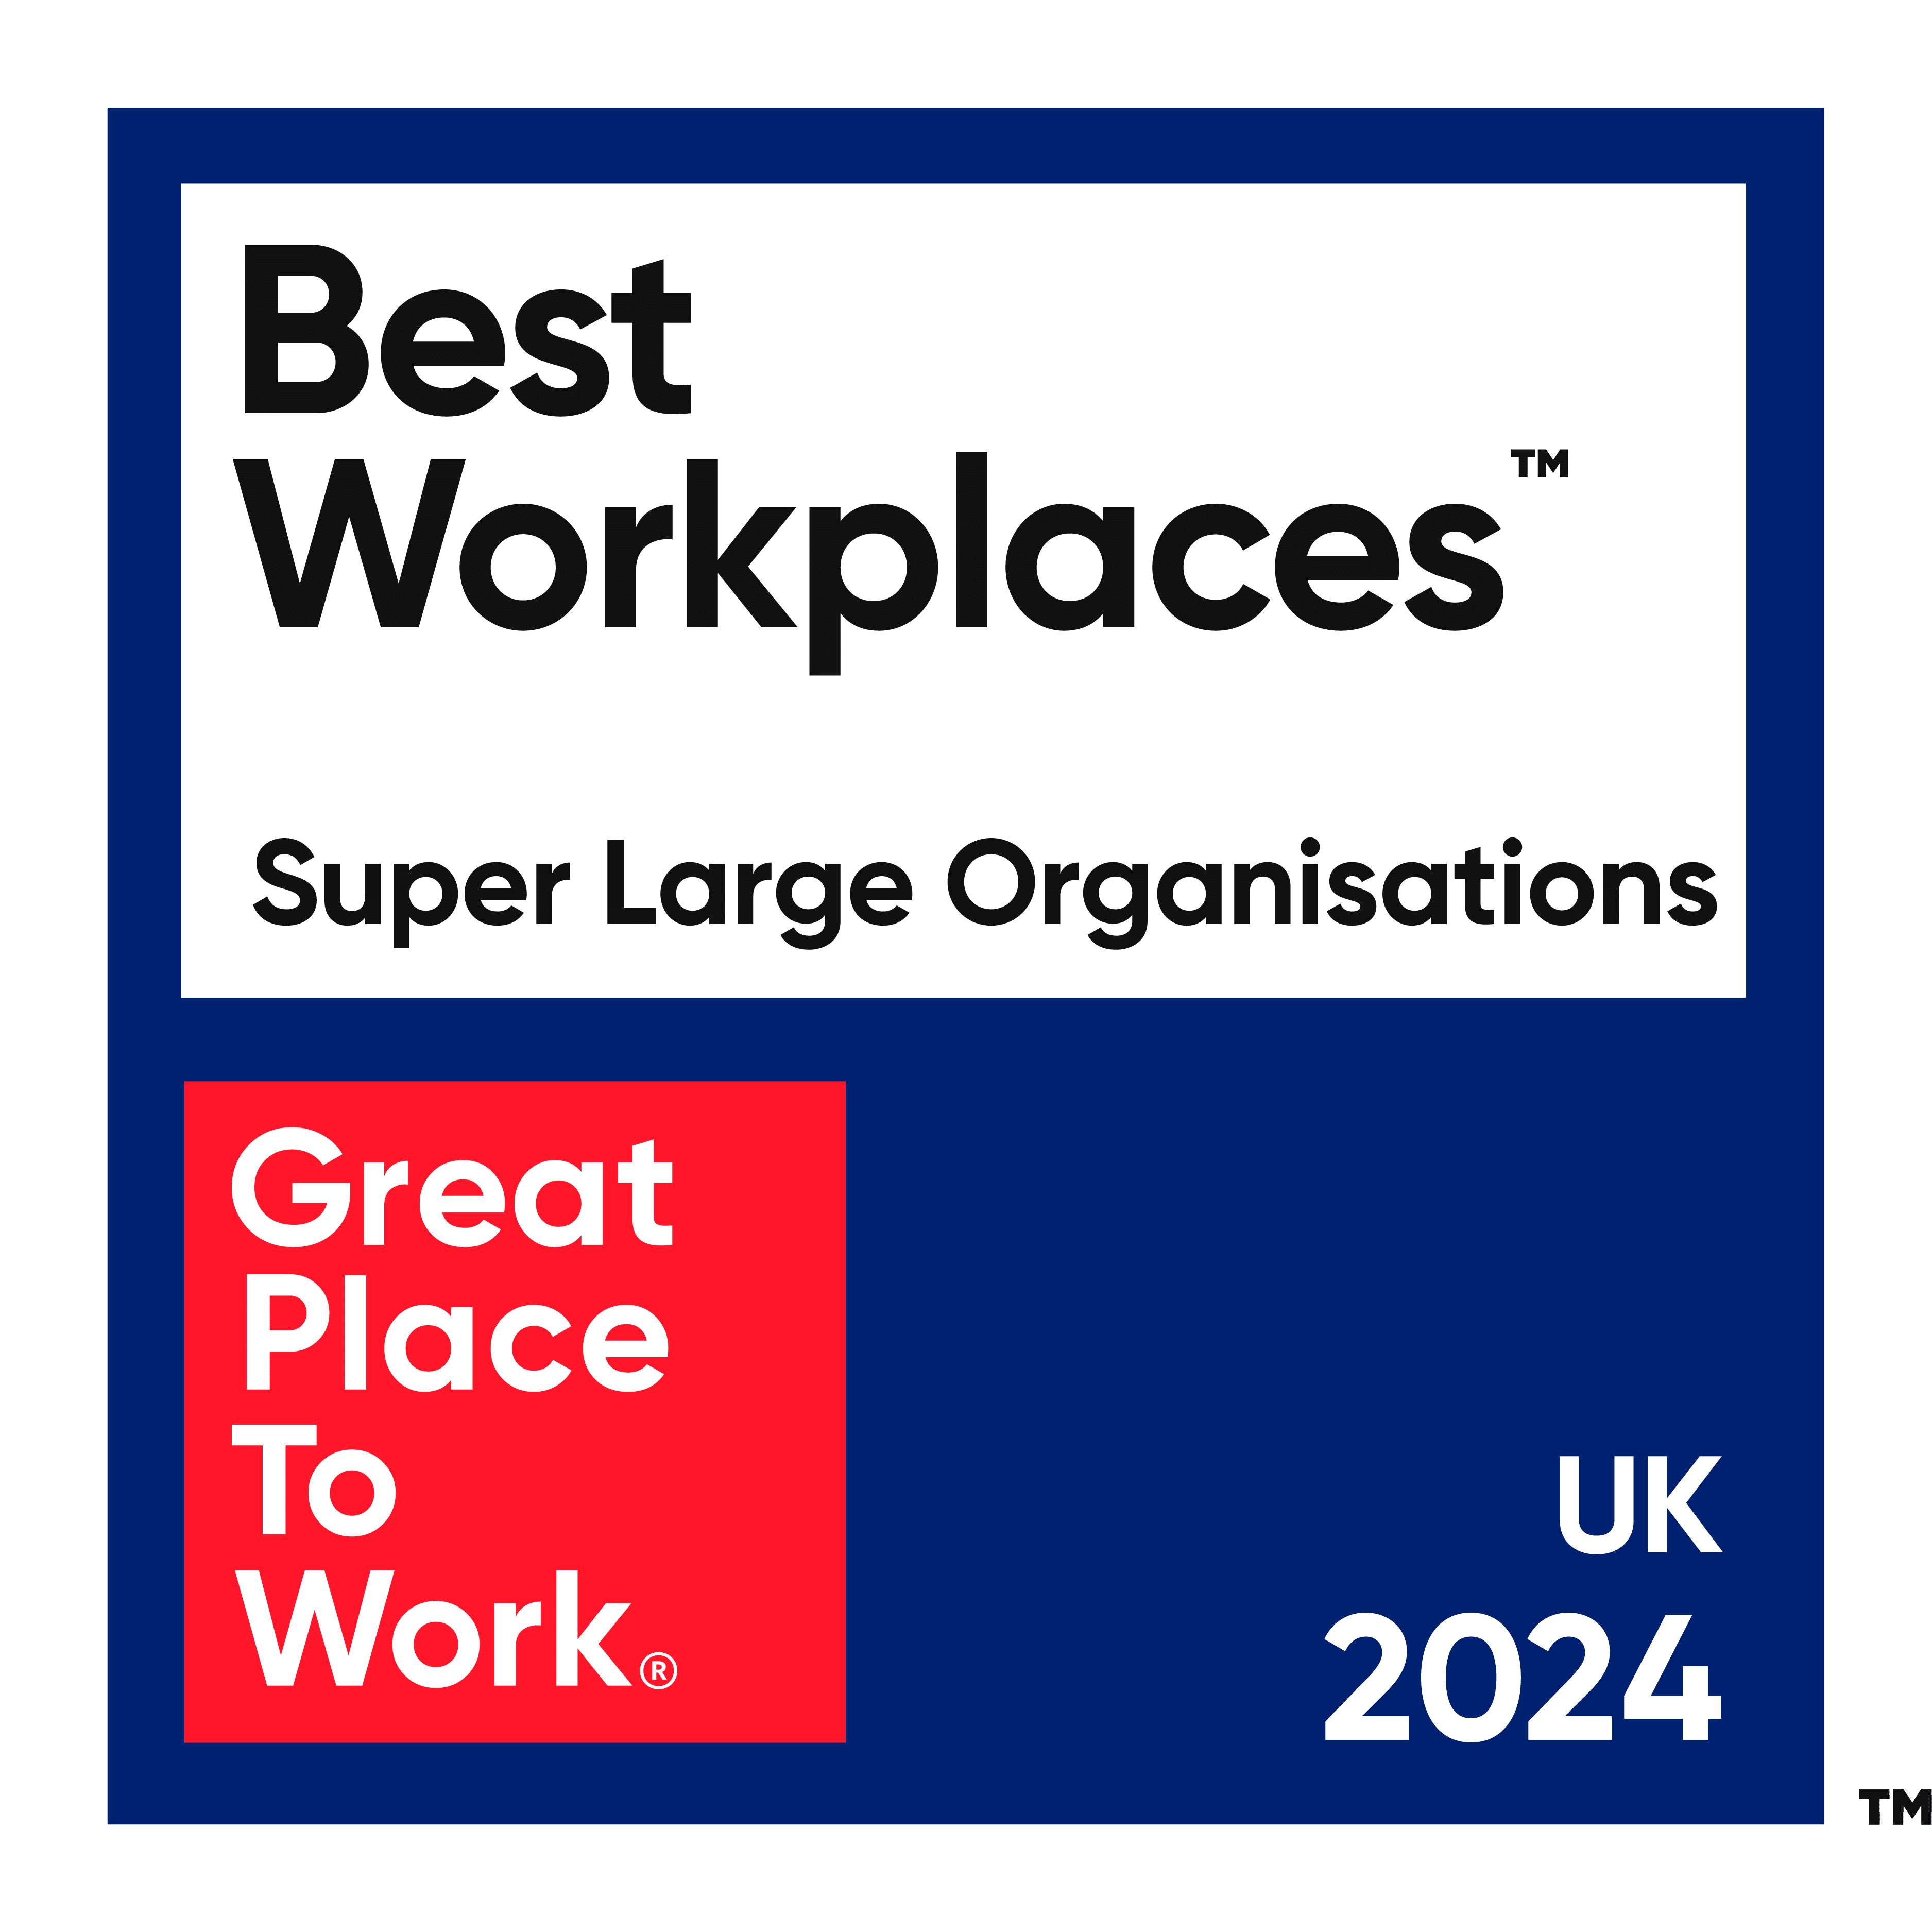 Great place to work UK 2024